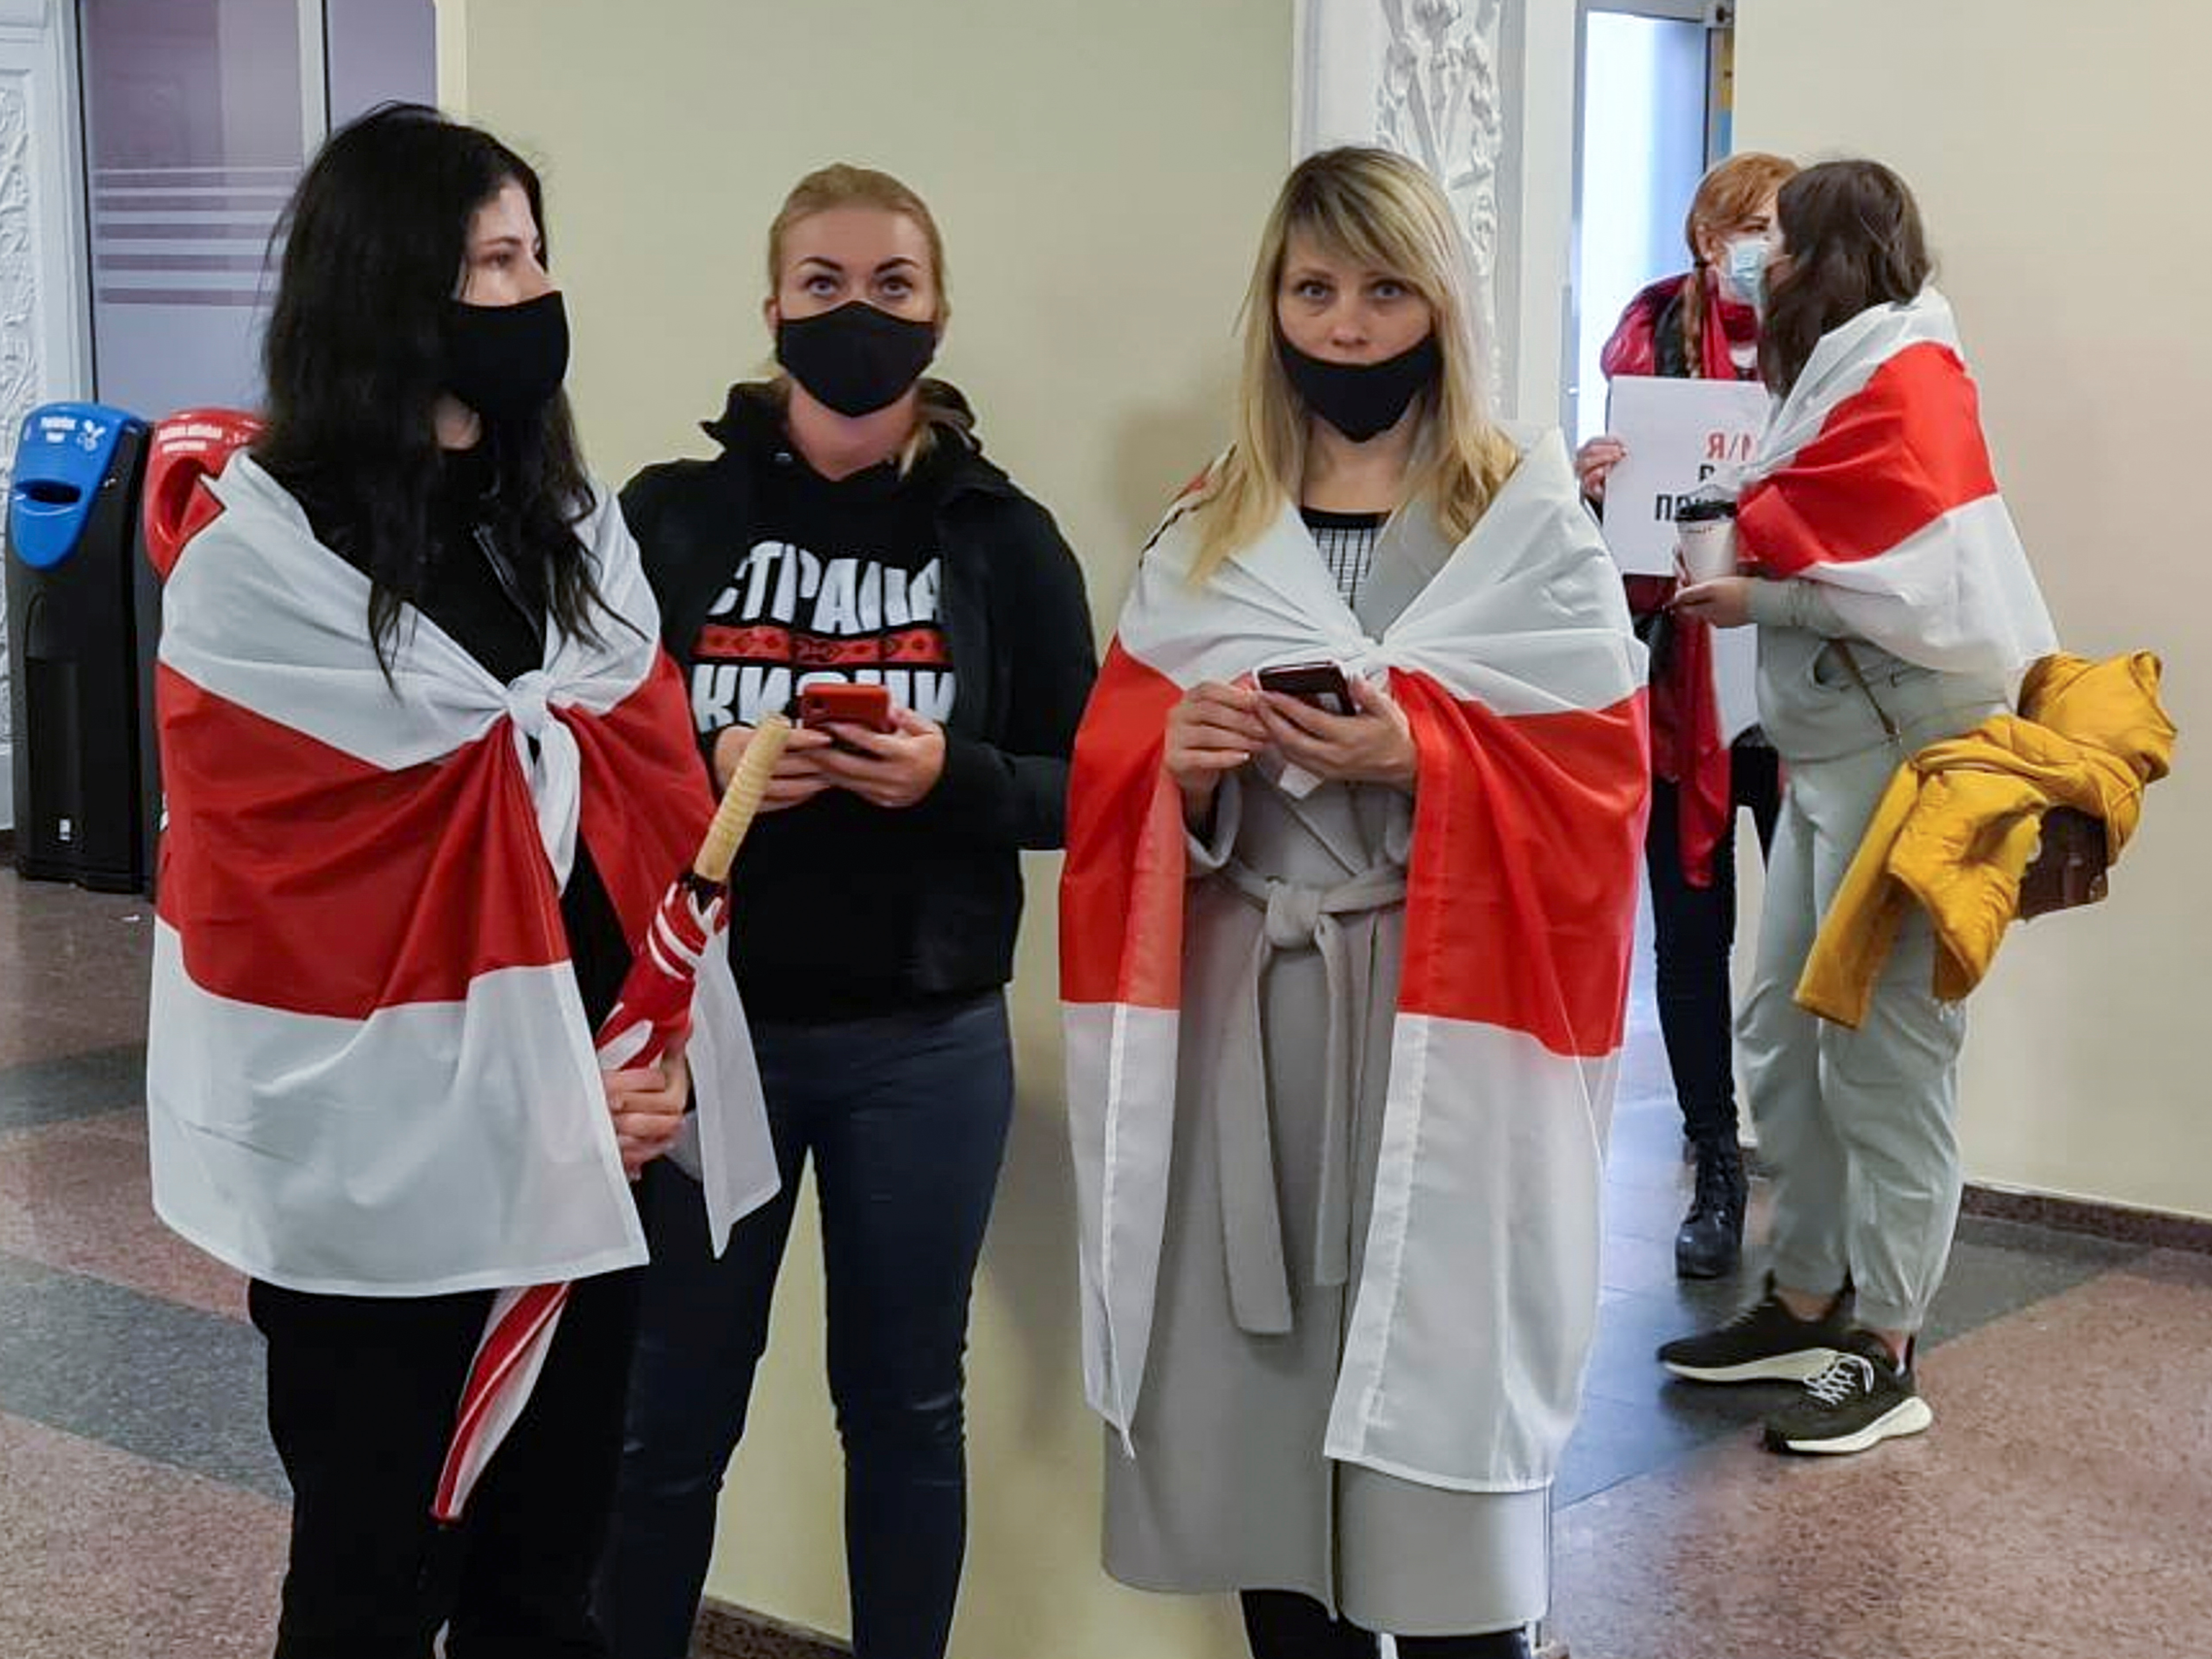 Supporters of Belarusian opposition blogger and activist Protasevich wait at Vilnius Airport in Vilnius